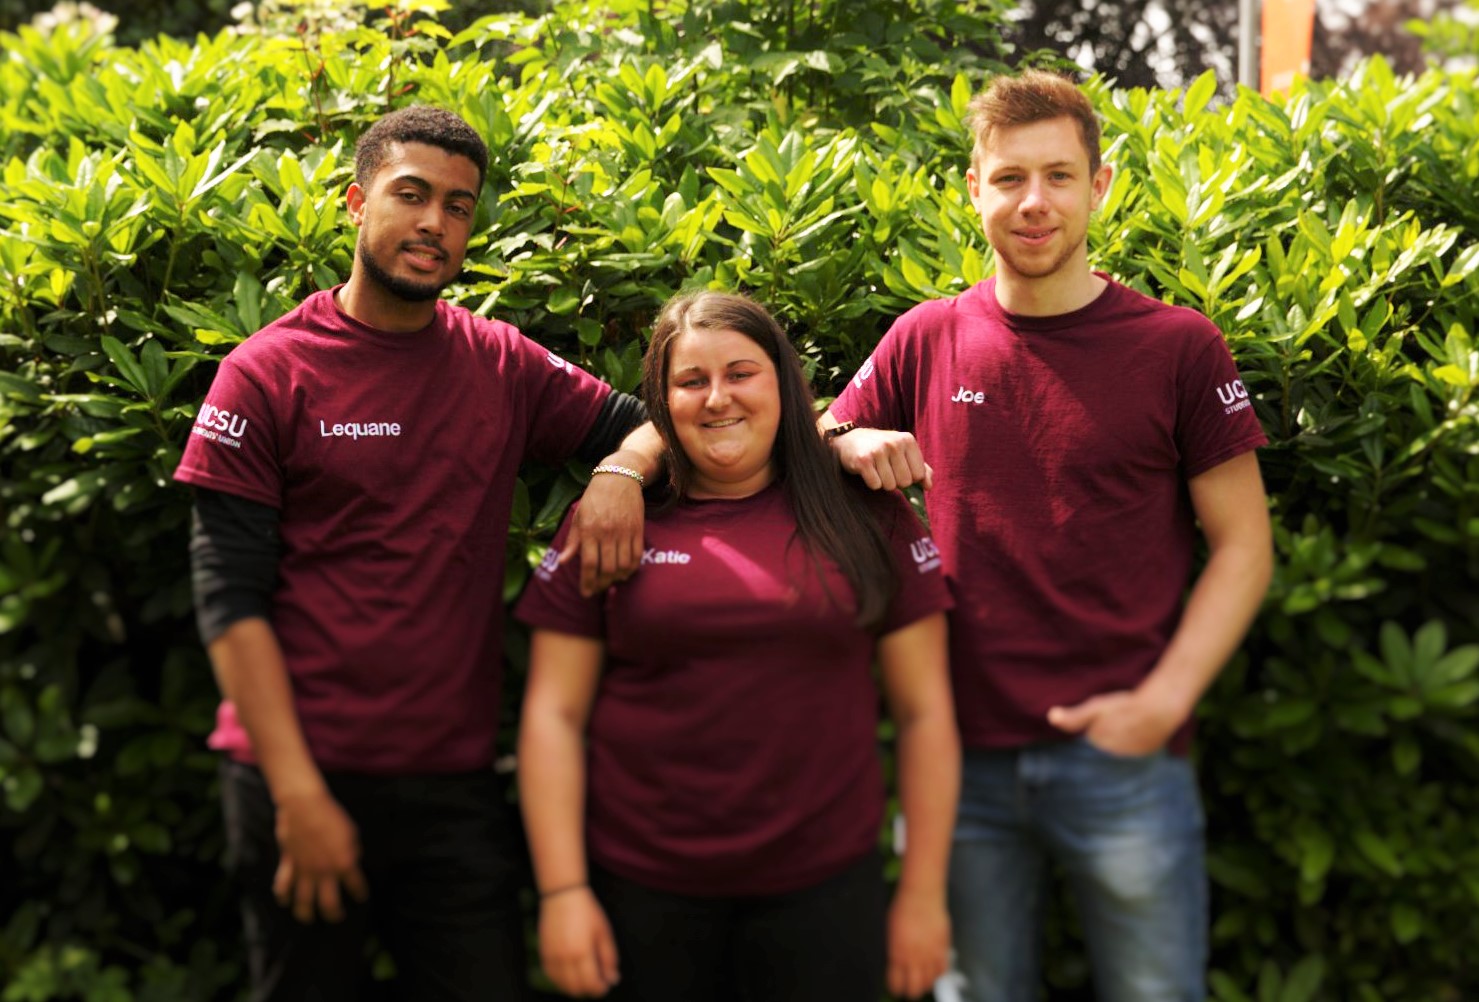 Students Union Officers, Lequane, Katie and Joe